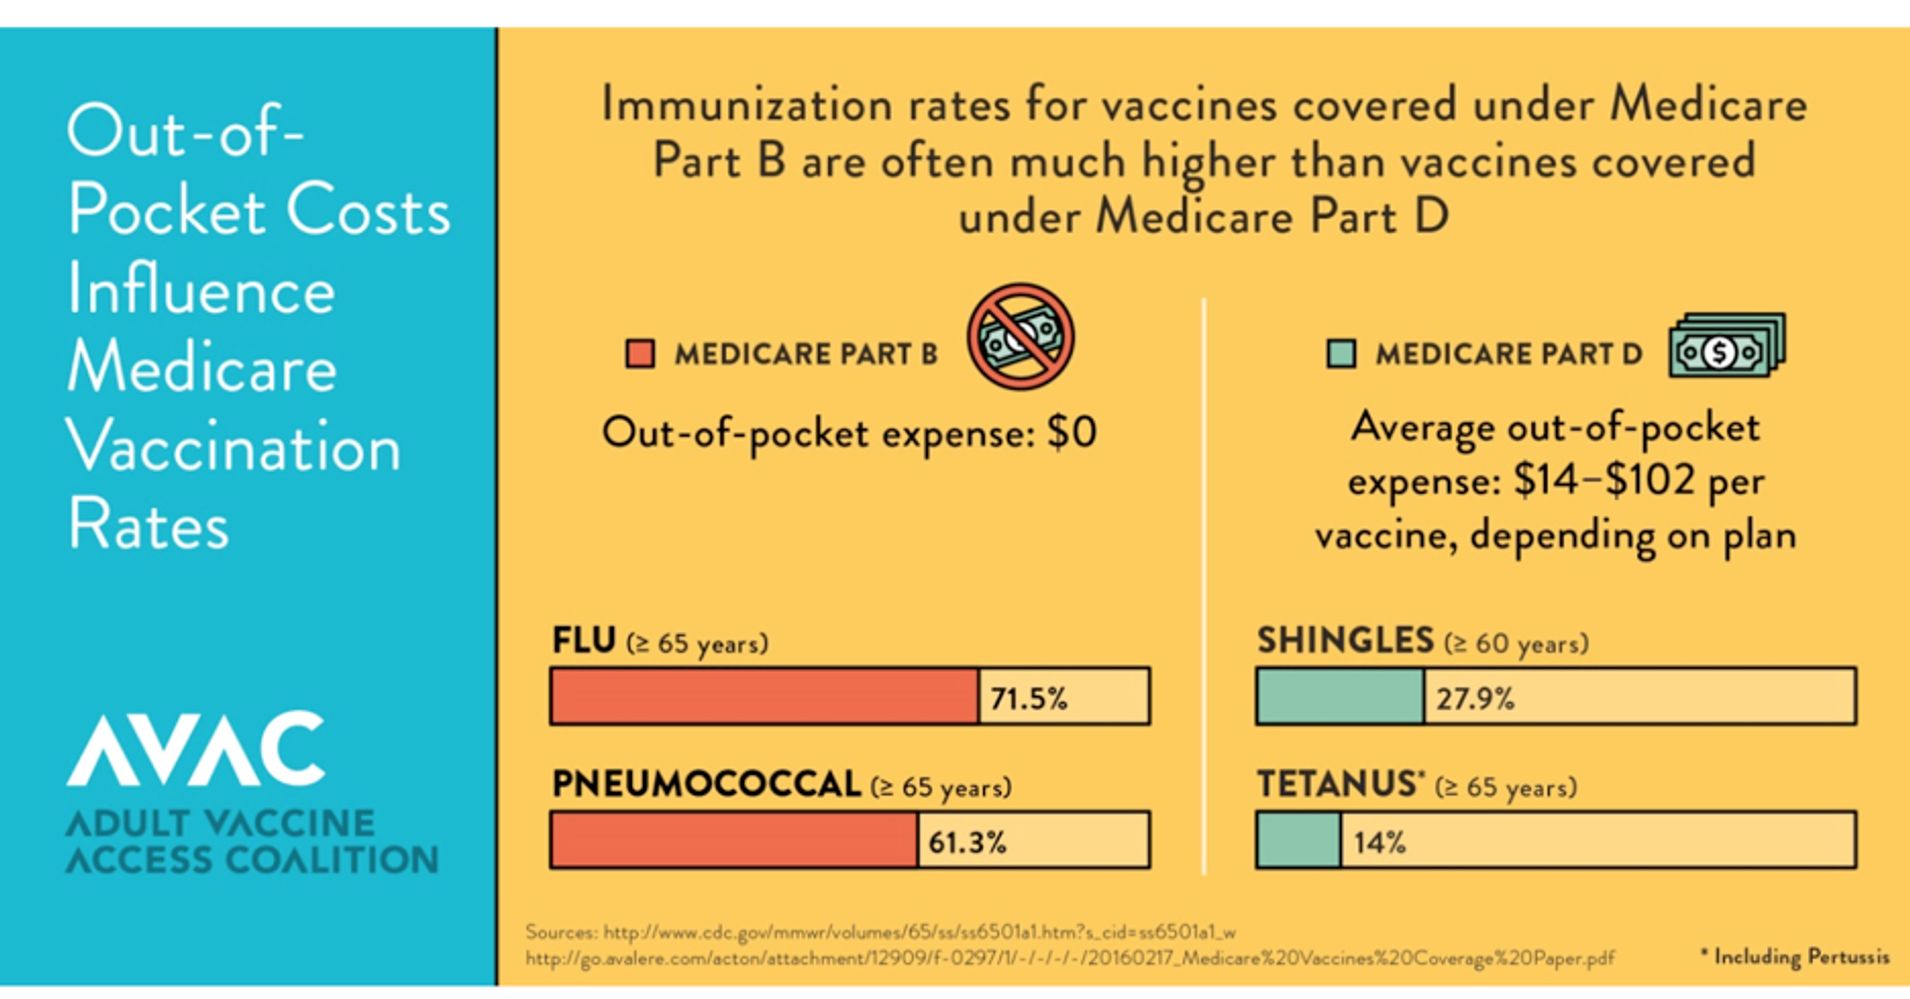 Full Coverage of Vaccines Under Medicare Would Help Reduce Preventable